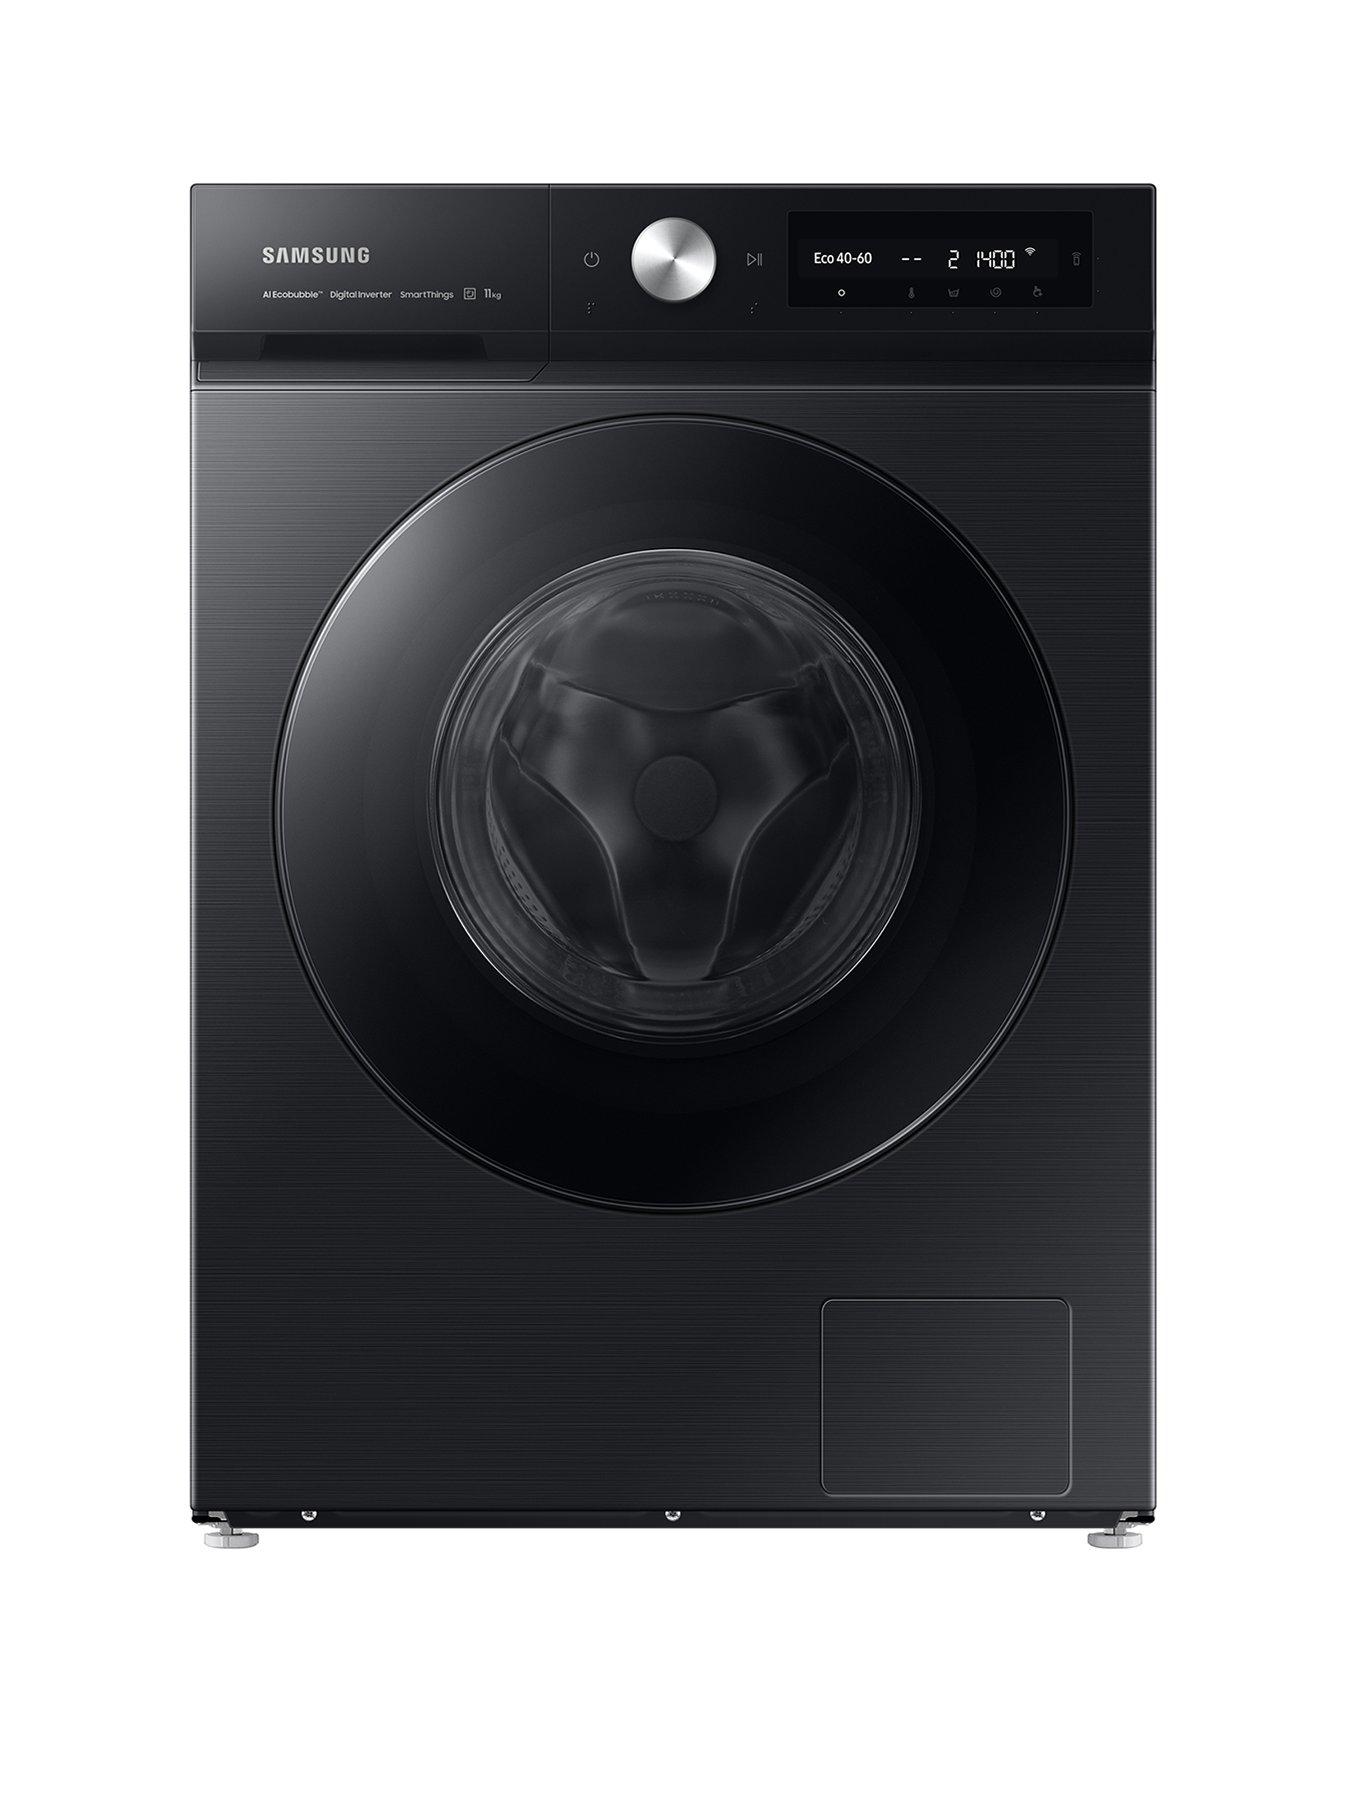 Samsung Series 6 Ww11Bb744DgbS1 Auto Optimal Wash And Spacemax Washing Machine - 11Kg Load 1400 Spin A Rated - Black